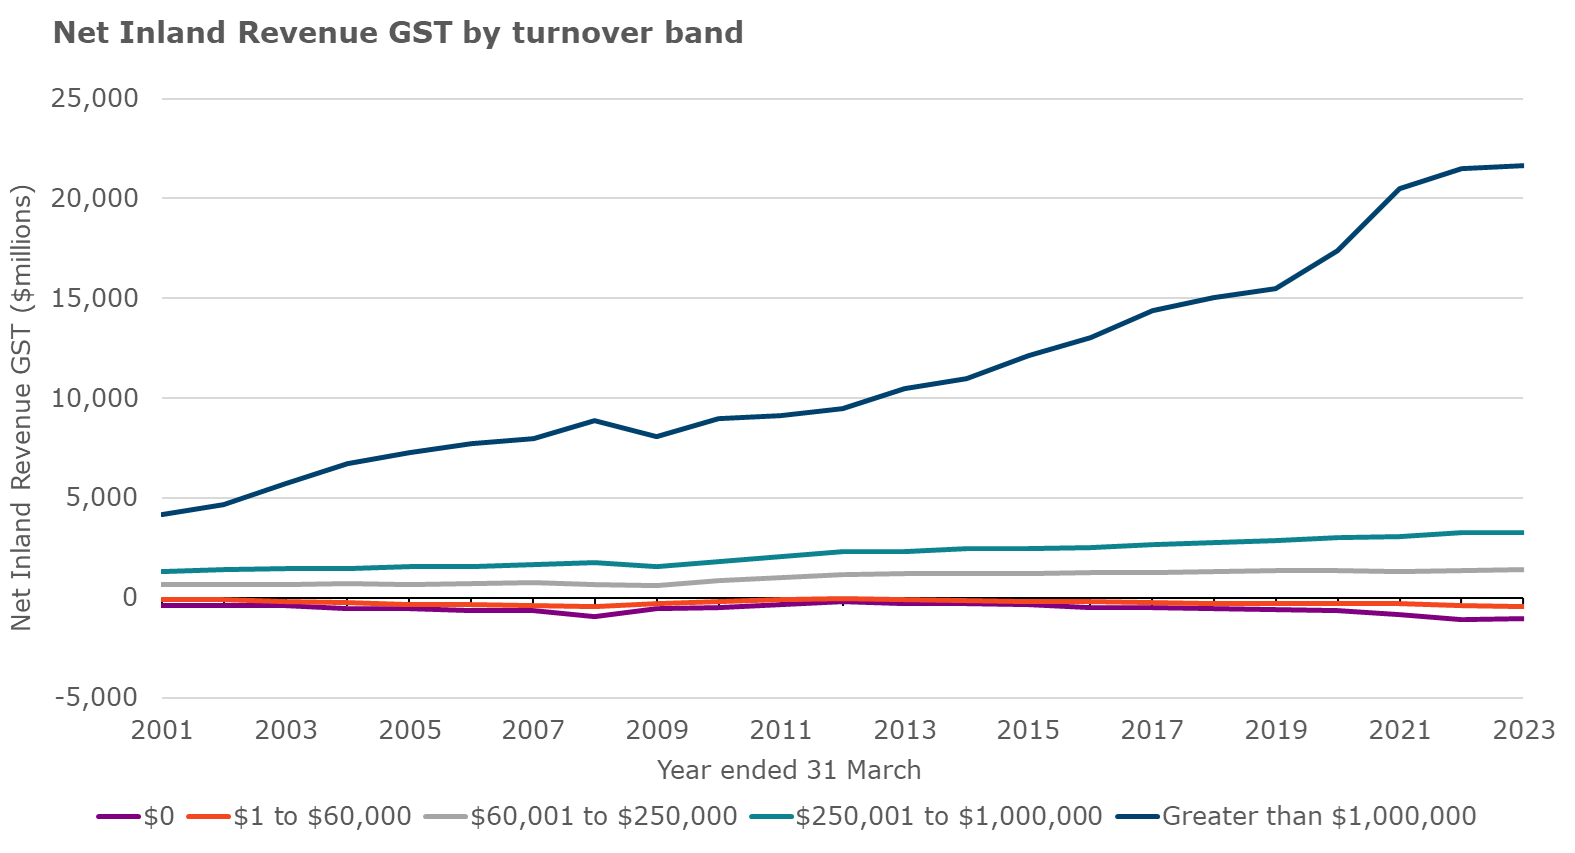 The graph above has 5 lines showing the net GST Inland Revenue collected by turnover band, from the year ended 31 March 2001 to the year ended 31 March 2023. The lines show the number of GST filers with no turnover, turnover between $1 and $60,000, turnover between $60,001 and $250,000, turnover between $250,001 and $1 million and turnover over $1 million. The vertical axis shows the amount of Inland Revenue GST revenue collected in dollars millions. The horizontal axis shows the March years between 2001 and 2023. Since 2001, the strongest growth in net IRD GST has occurred in taxpayers with turnover greater than $1 million, which has growth from $4,148 million in 2001 to $21,670 million in 2023. Net IRD GST has also increased for taxpayers with turnover greater than $1 but at a slower rate. Net IRD GST collected from taxpayers with no turnover has decreased from -$368 million to -$1,054 million.